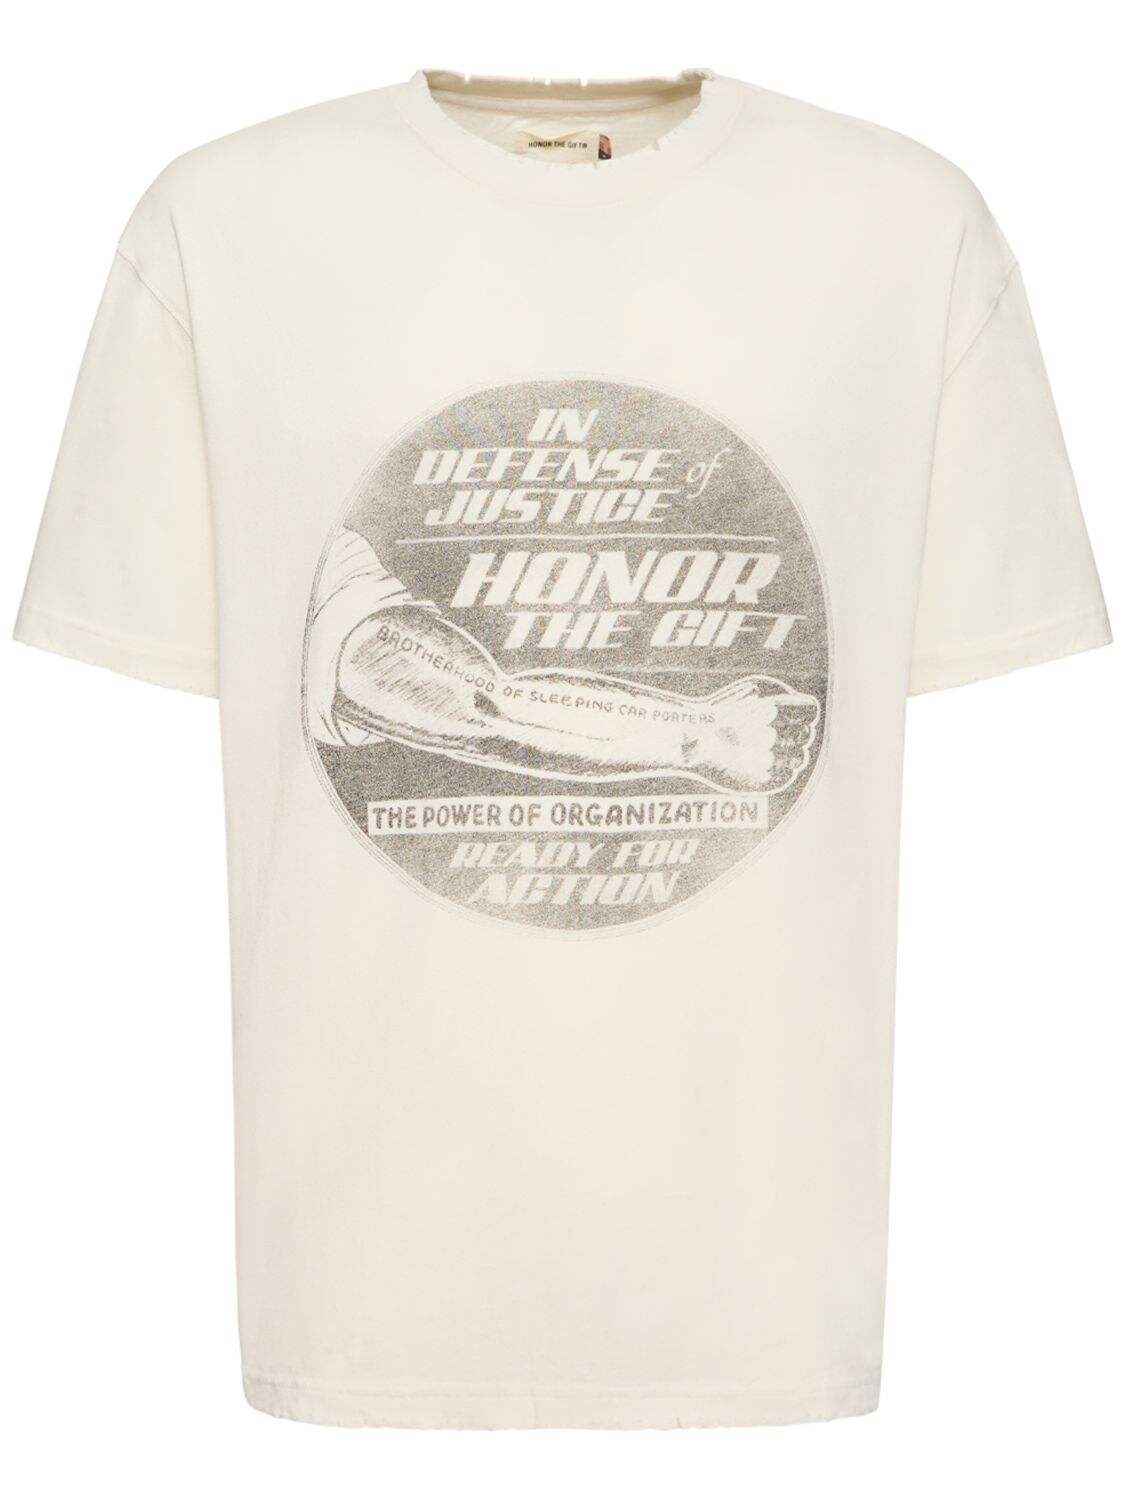 Ready For Action Cotton Jersey T-shirt - HONOR THE GIFT - Modalova